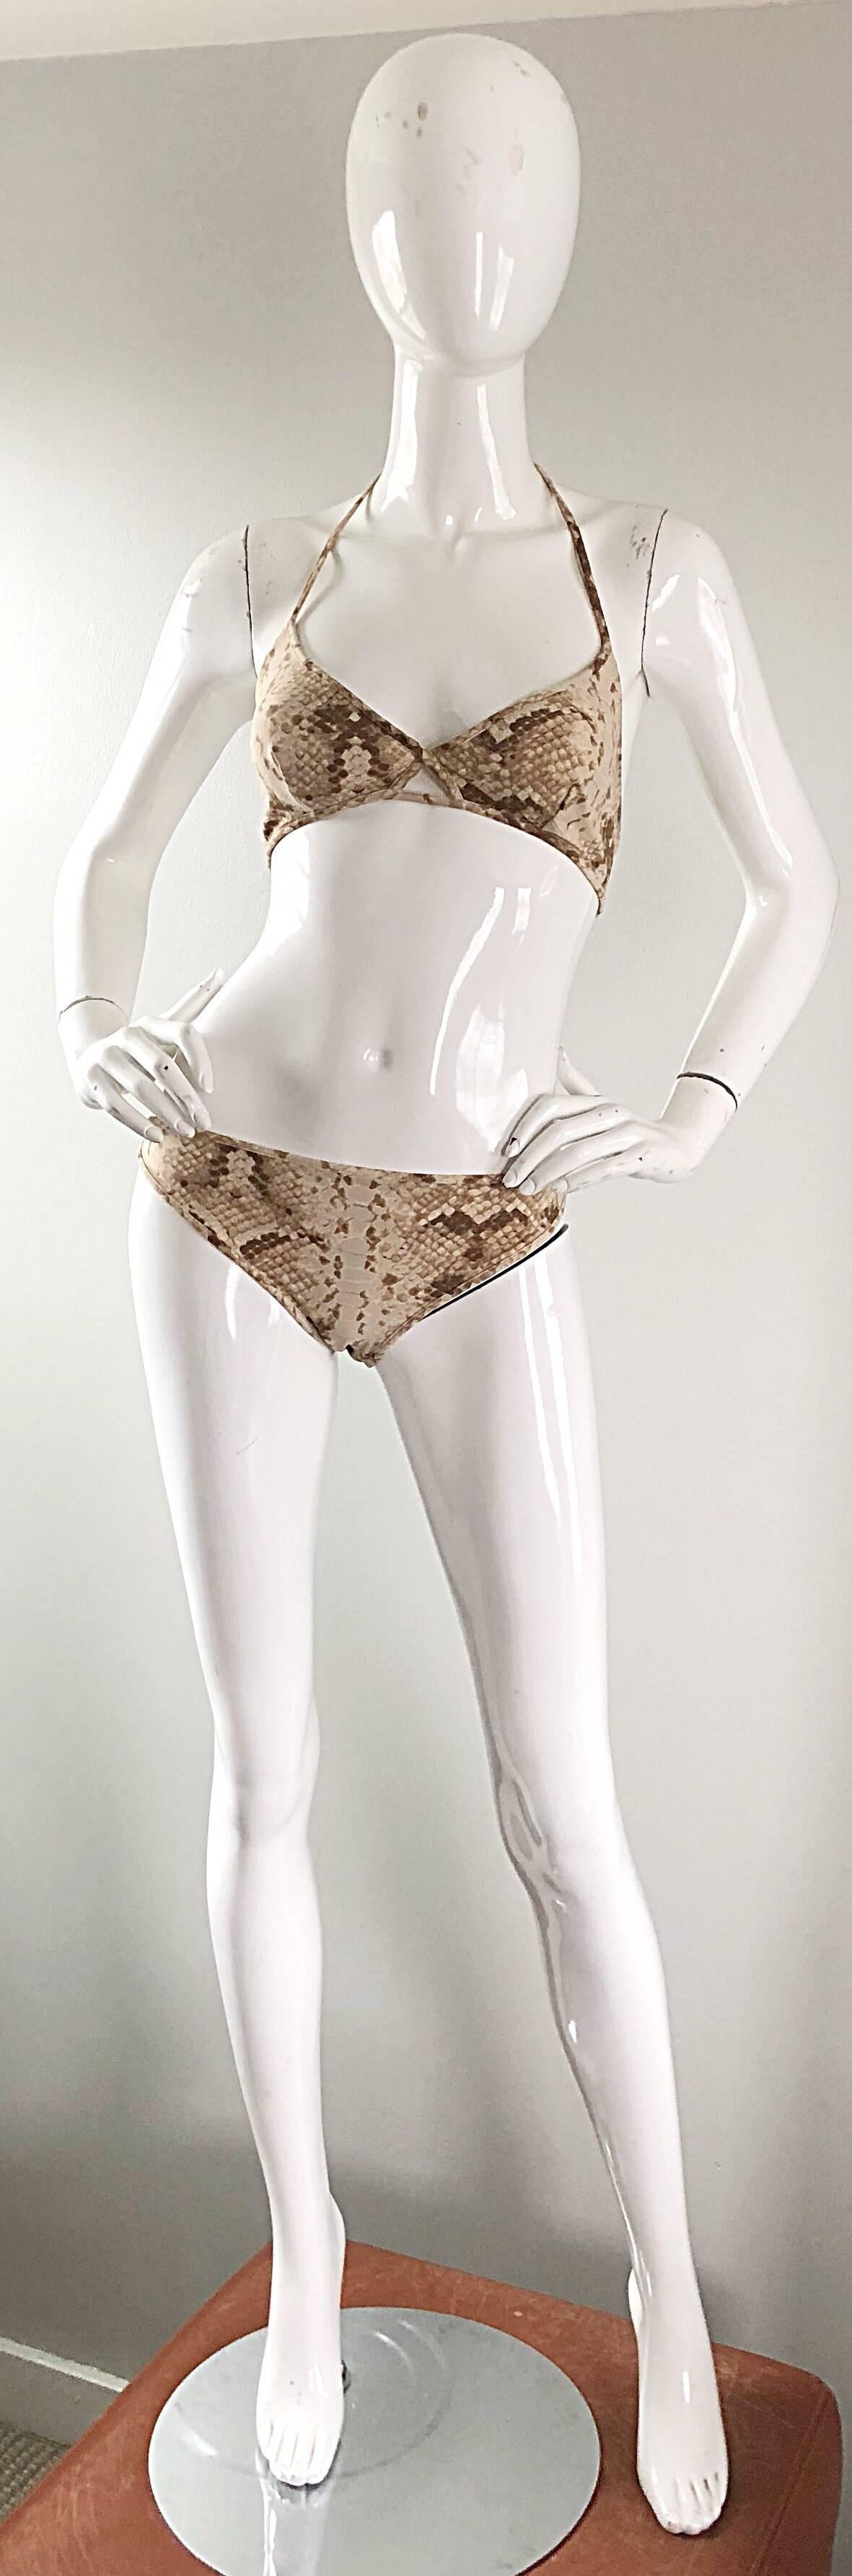 Brand new with tags TOM FORD for YVES SAINT LAURENT snakeskin print two piece swimwear! Flattering animal print. Top ties at top back neck, with a cut-out at center bust. Low rise briefs. Plenty of stretch. Classic timeless style. Made in